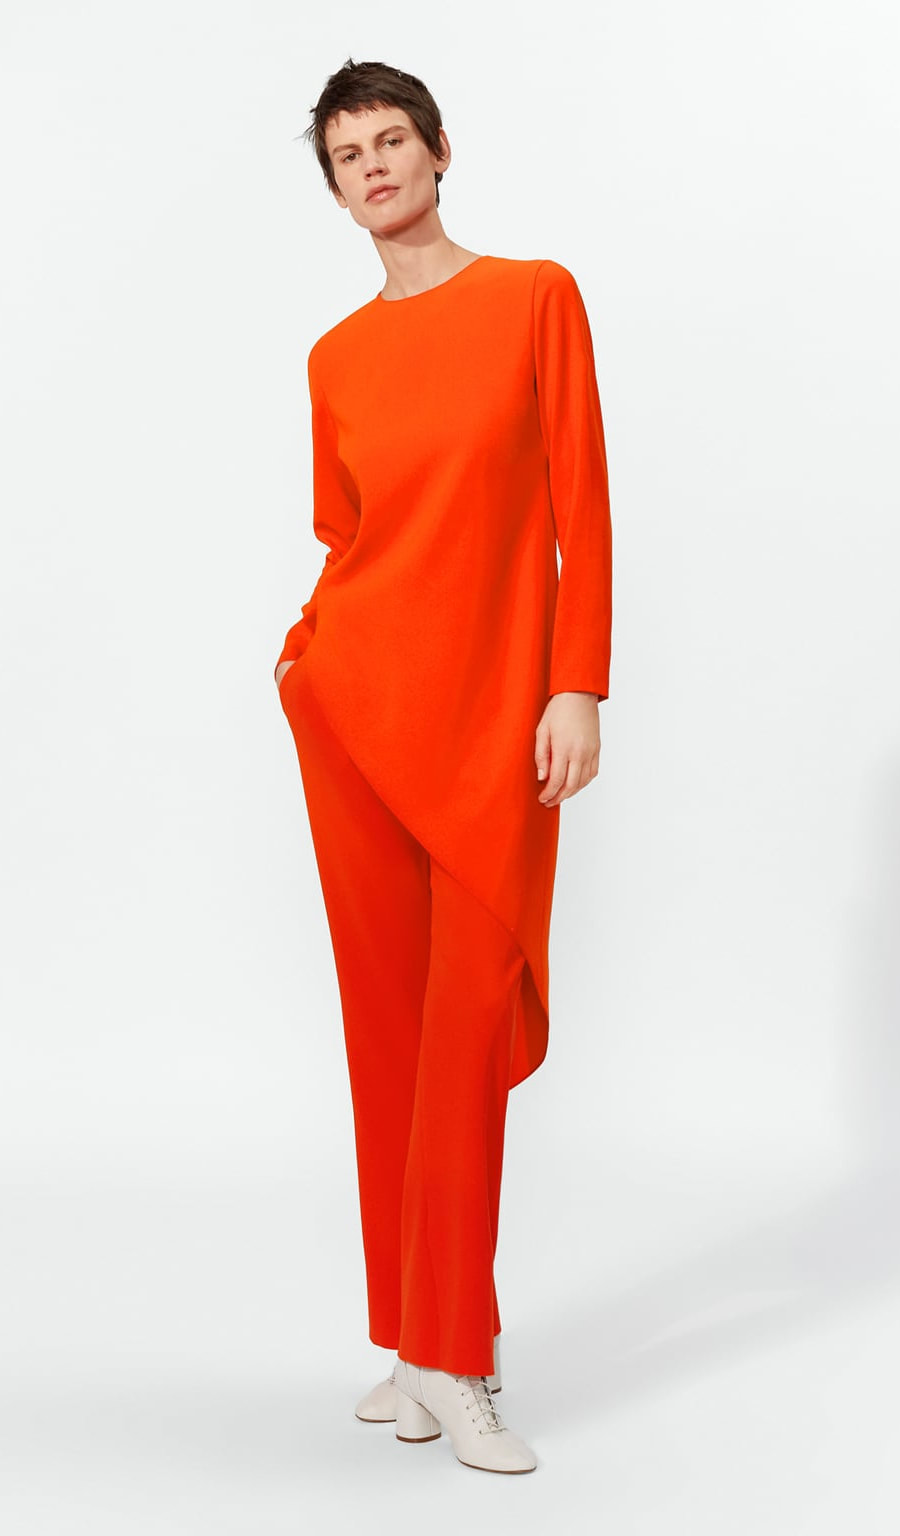 Zara long asymmetric top and side vent trousers in orange